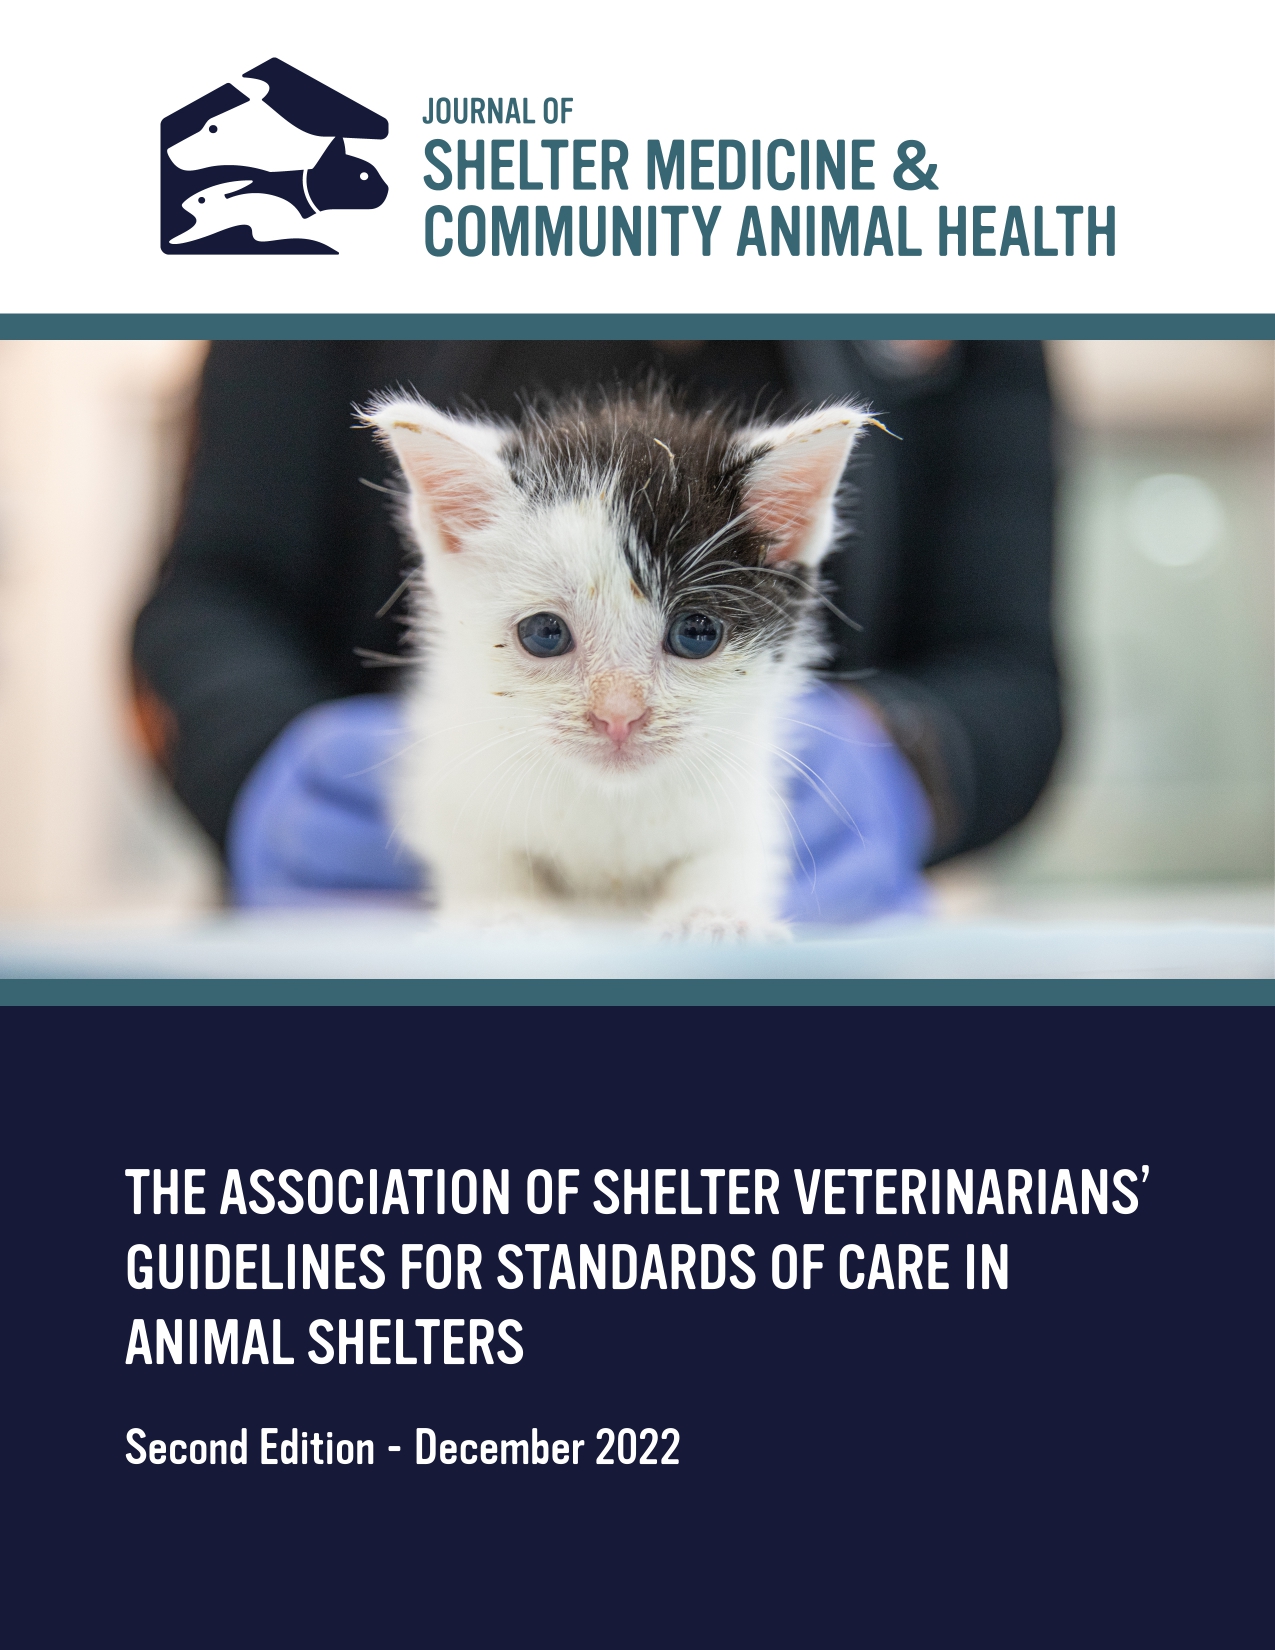 					View Vol. 1 No. S1 (2022): The Guidelines for Standards of Care in Animal Shelters, Second Edition
				